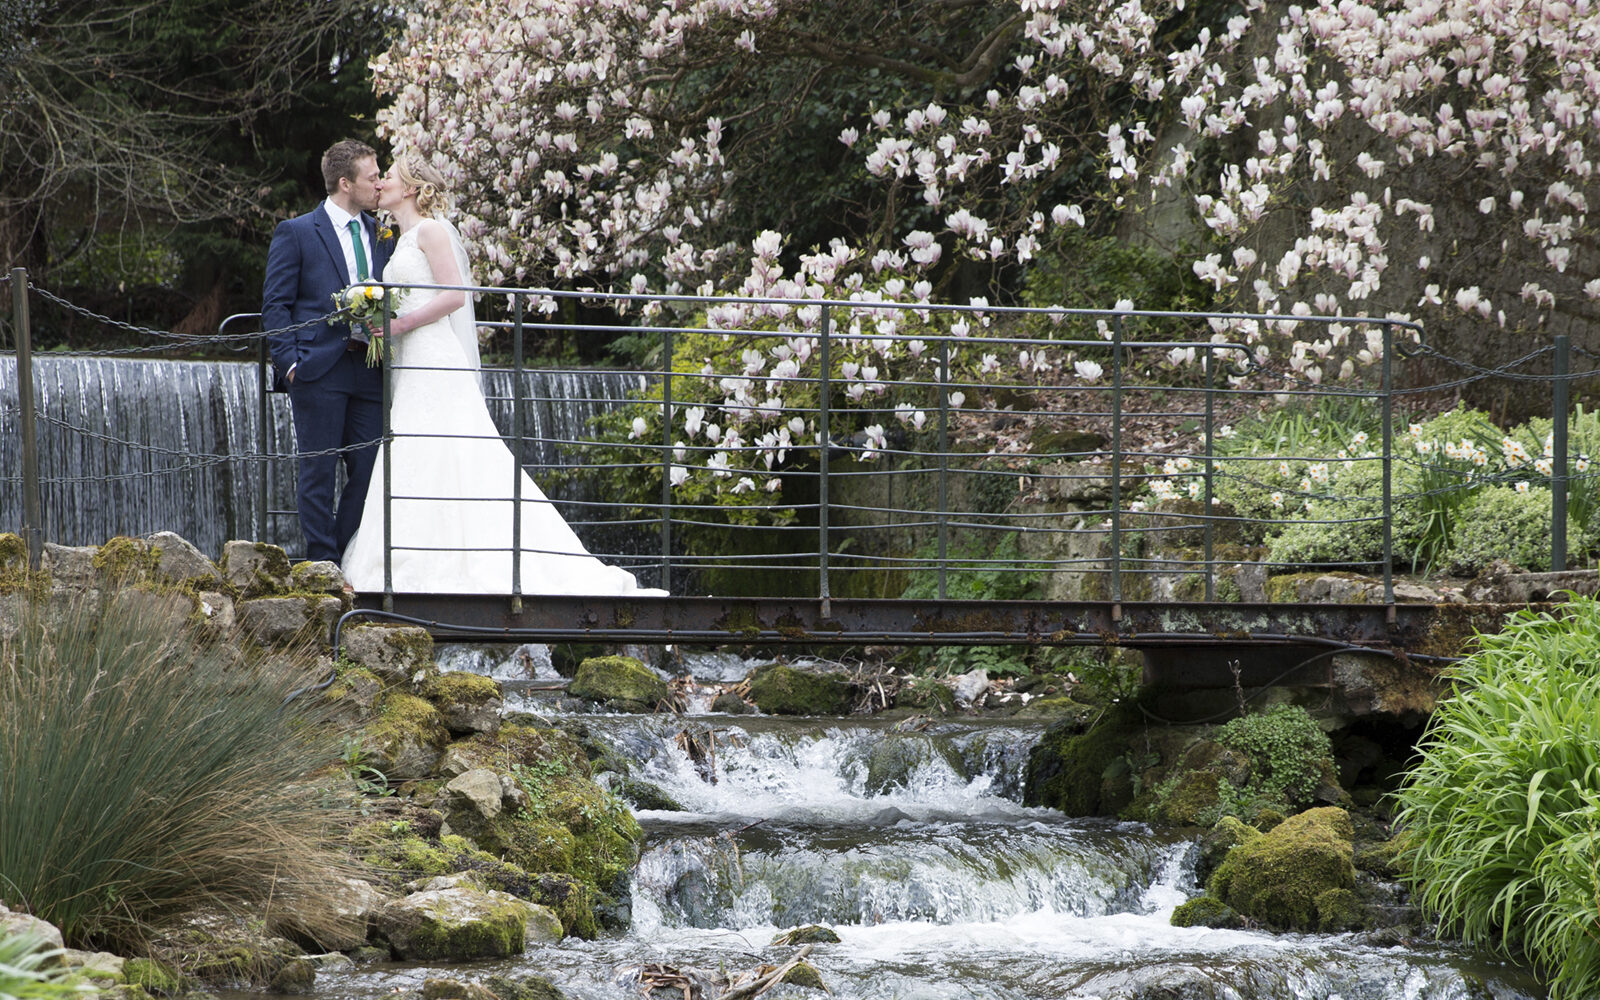 Bride and Groom on bridge overlooking waterfall at The Orangery in Maidstone, Kent. Captured by Kent wedding photographer Victoria Green.